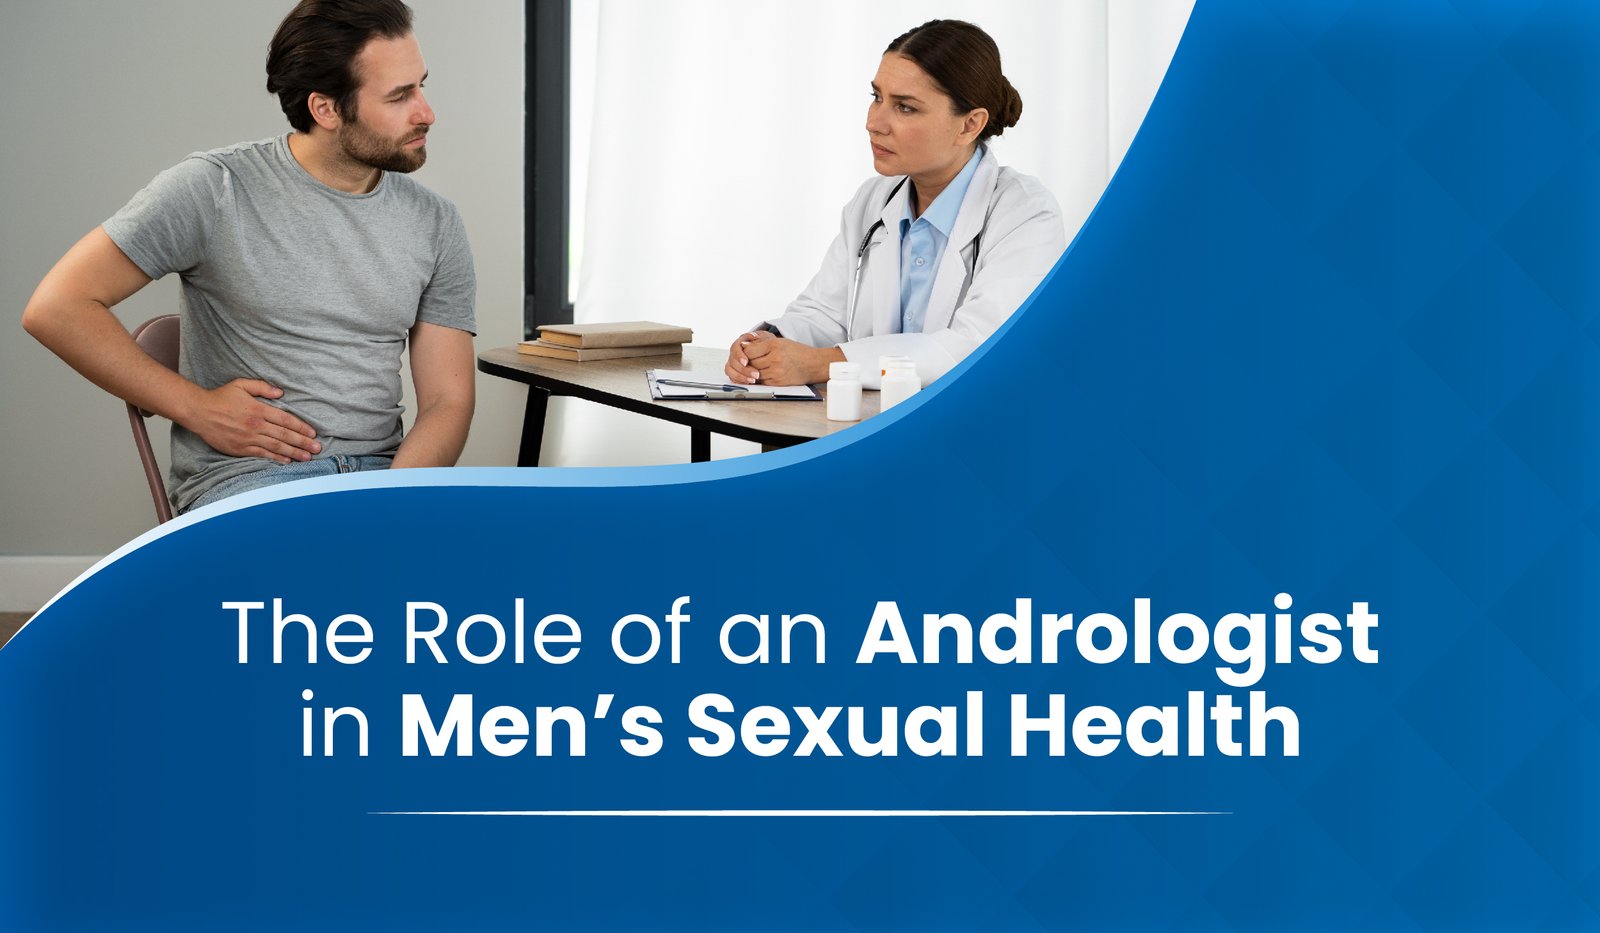 the role of andrologists in men's sexual health